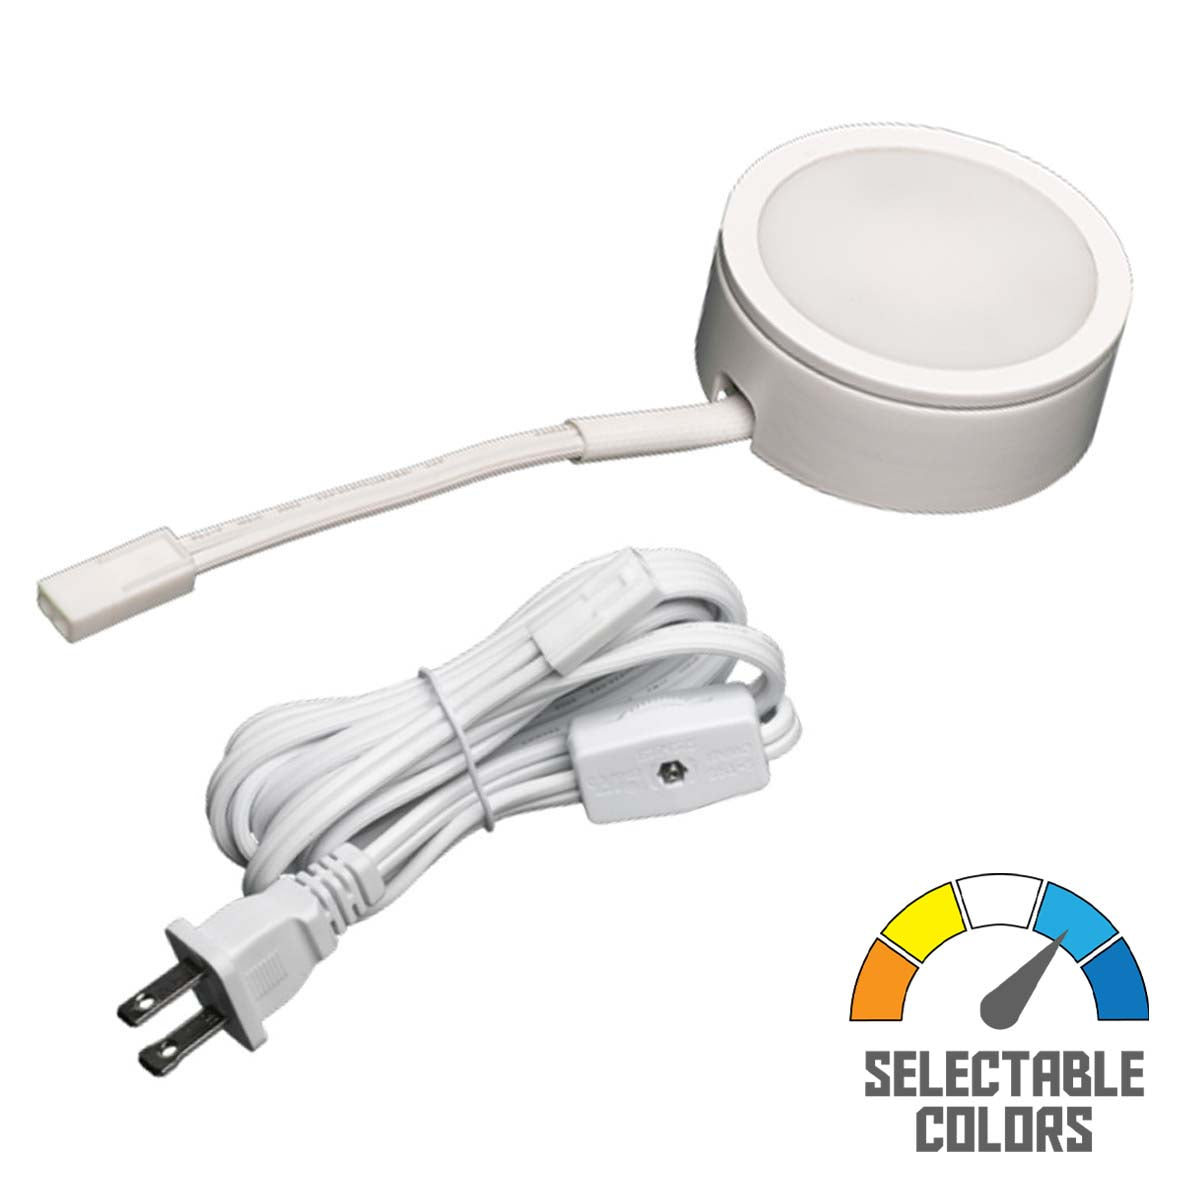 MVP LED Puck Light with 6in Lead Wire and Power Cord, Selectable CCT 2700K to 5000K, 120V, White